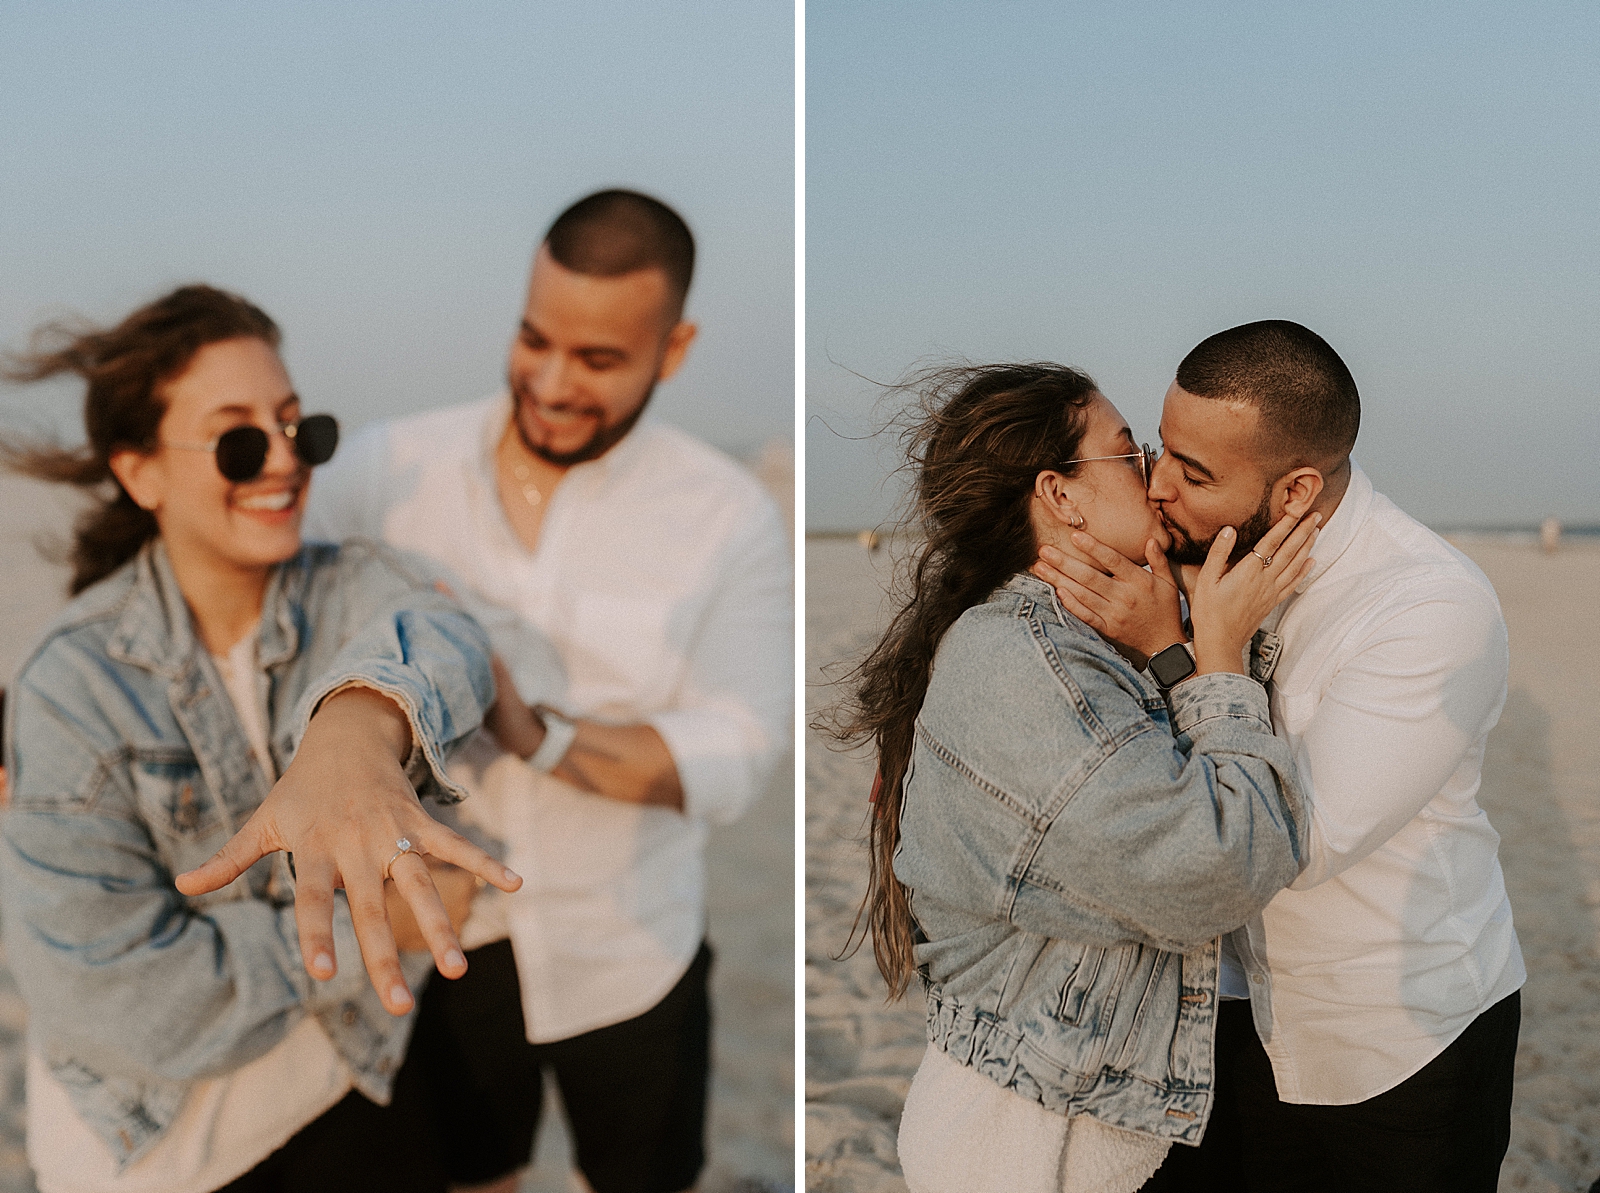 Woman showing off engagement ring and kissing man